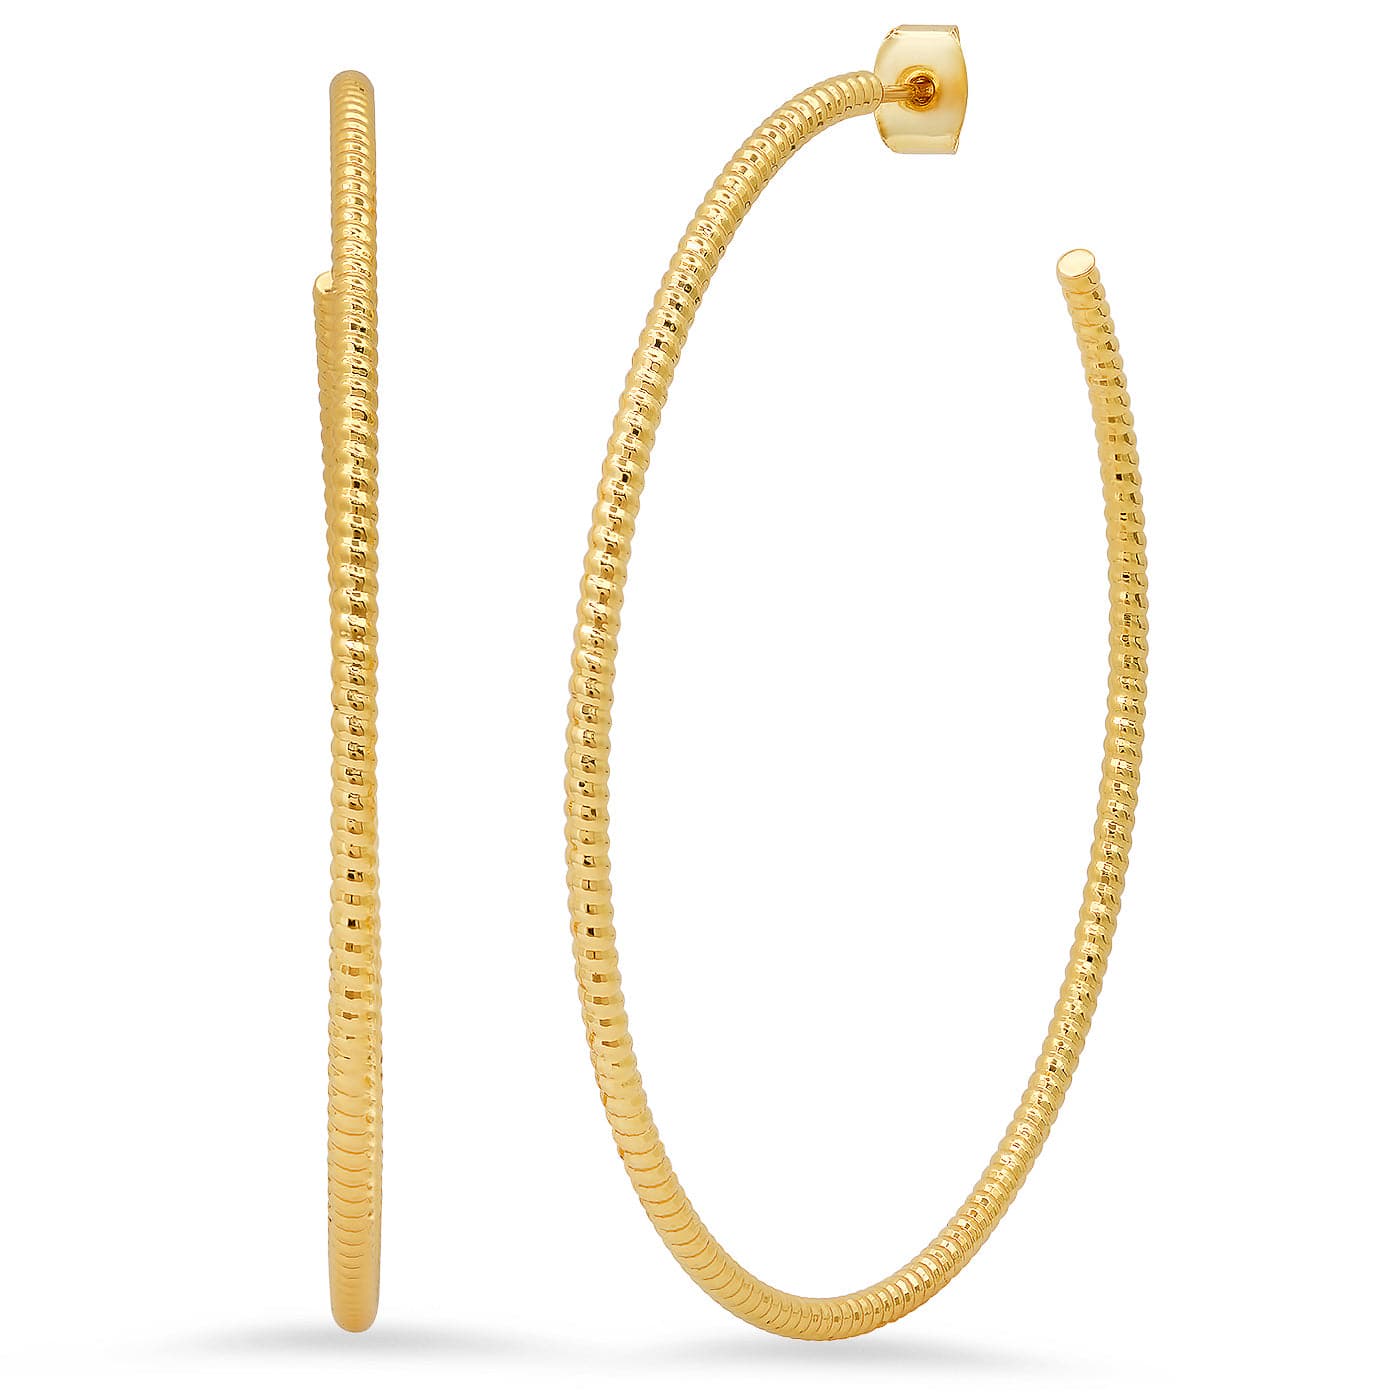 TAI JEWELRY Earrings Twisted Extra Extra Large Gold Hoops